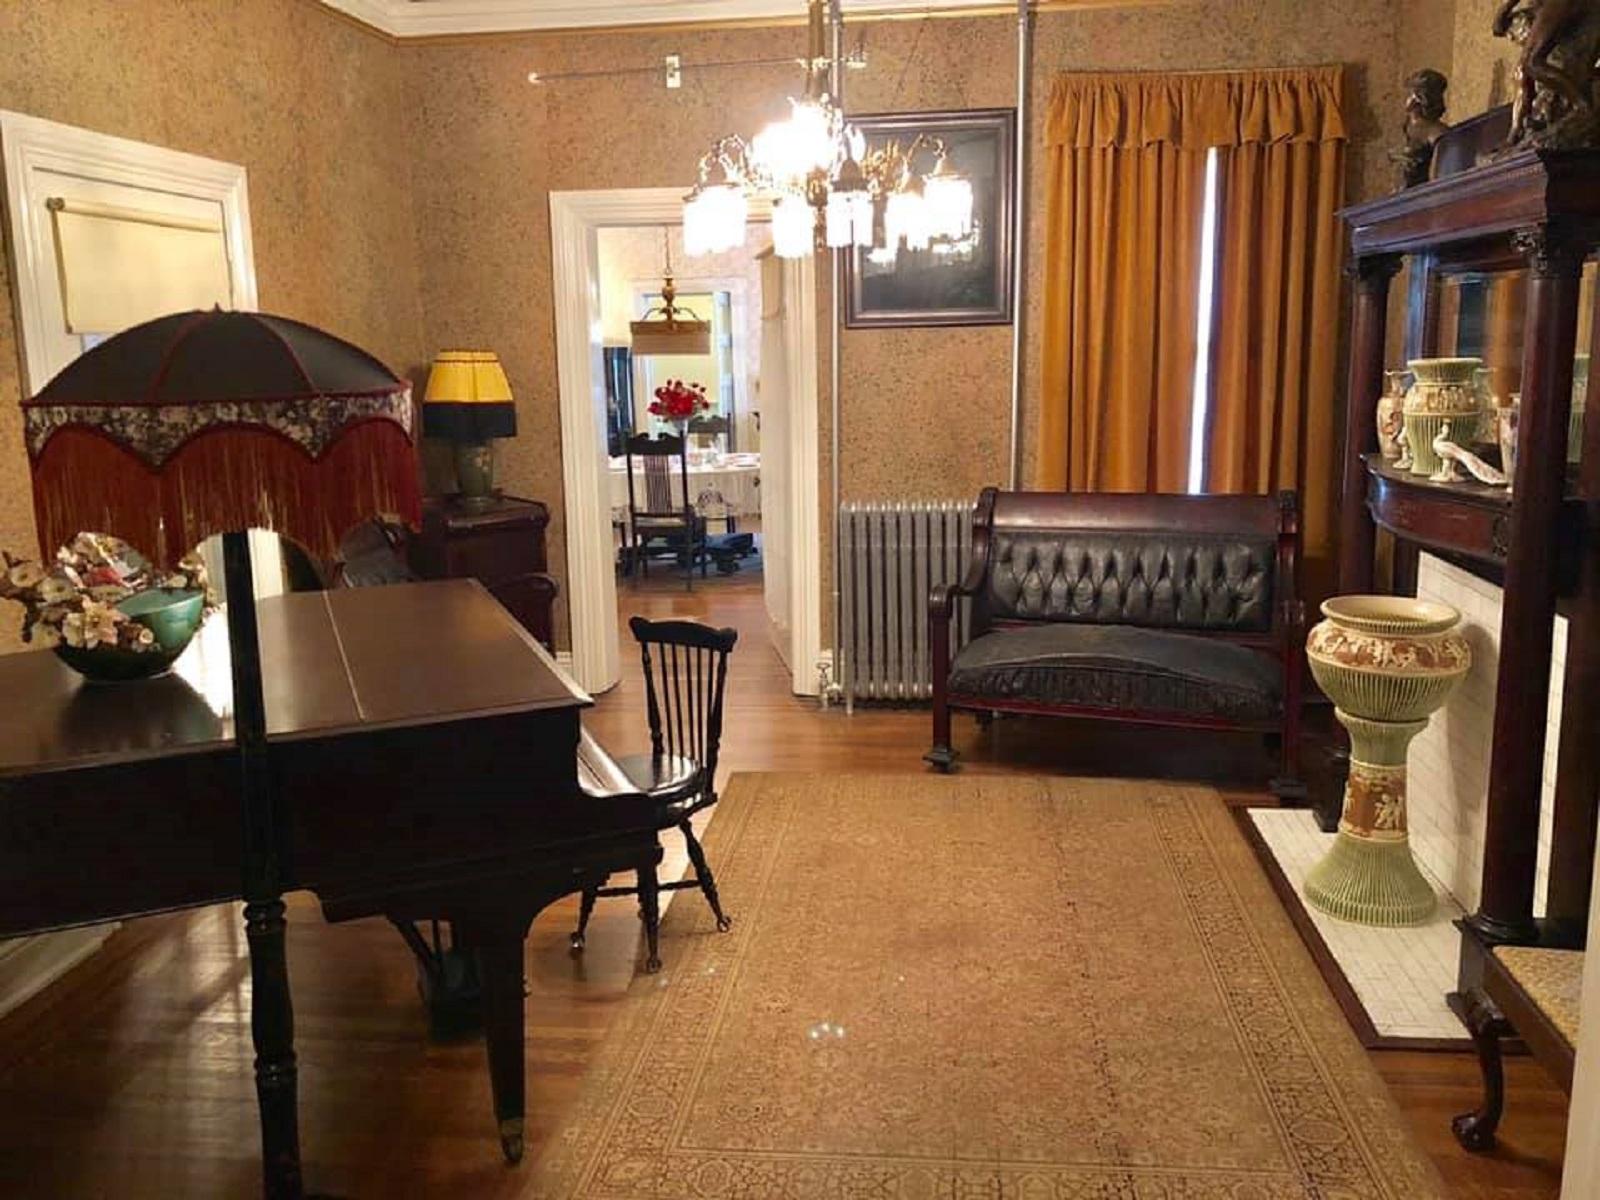 The Back Parlor of the Historic Walker Home